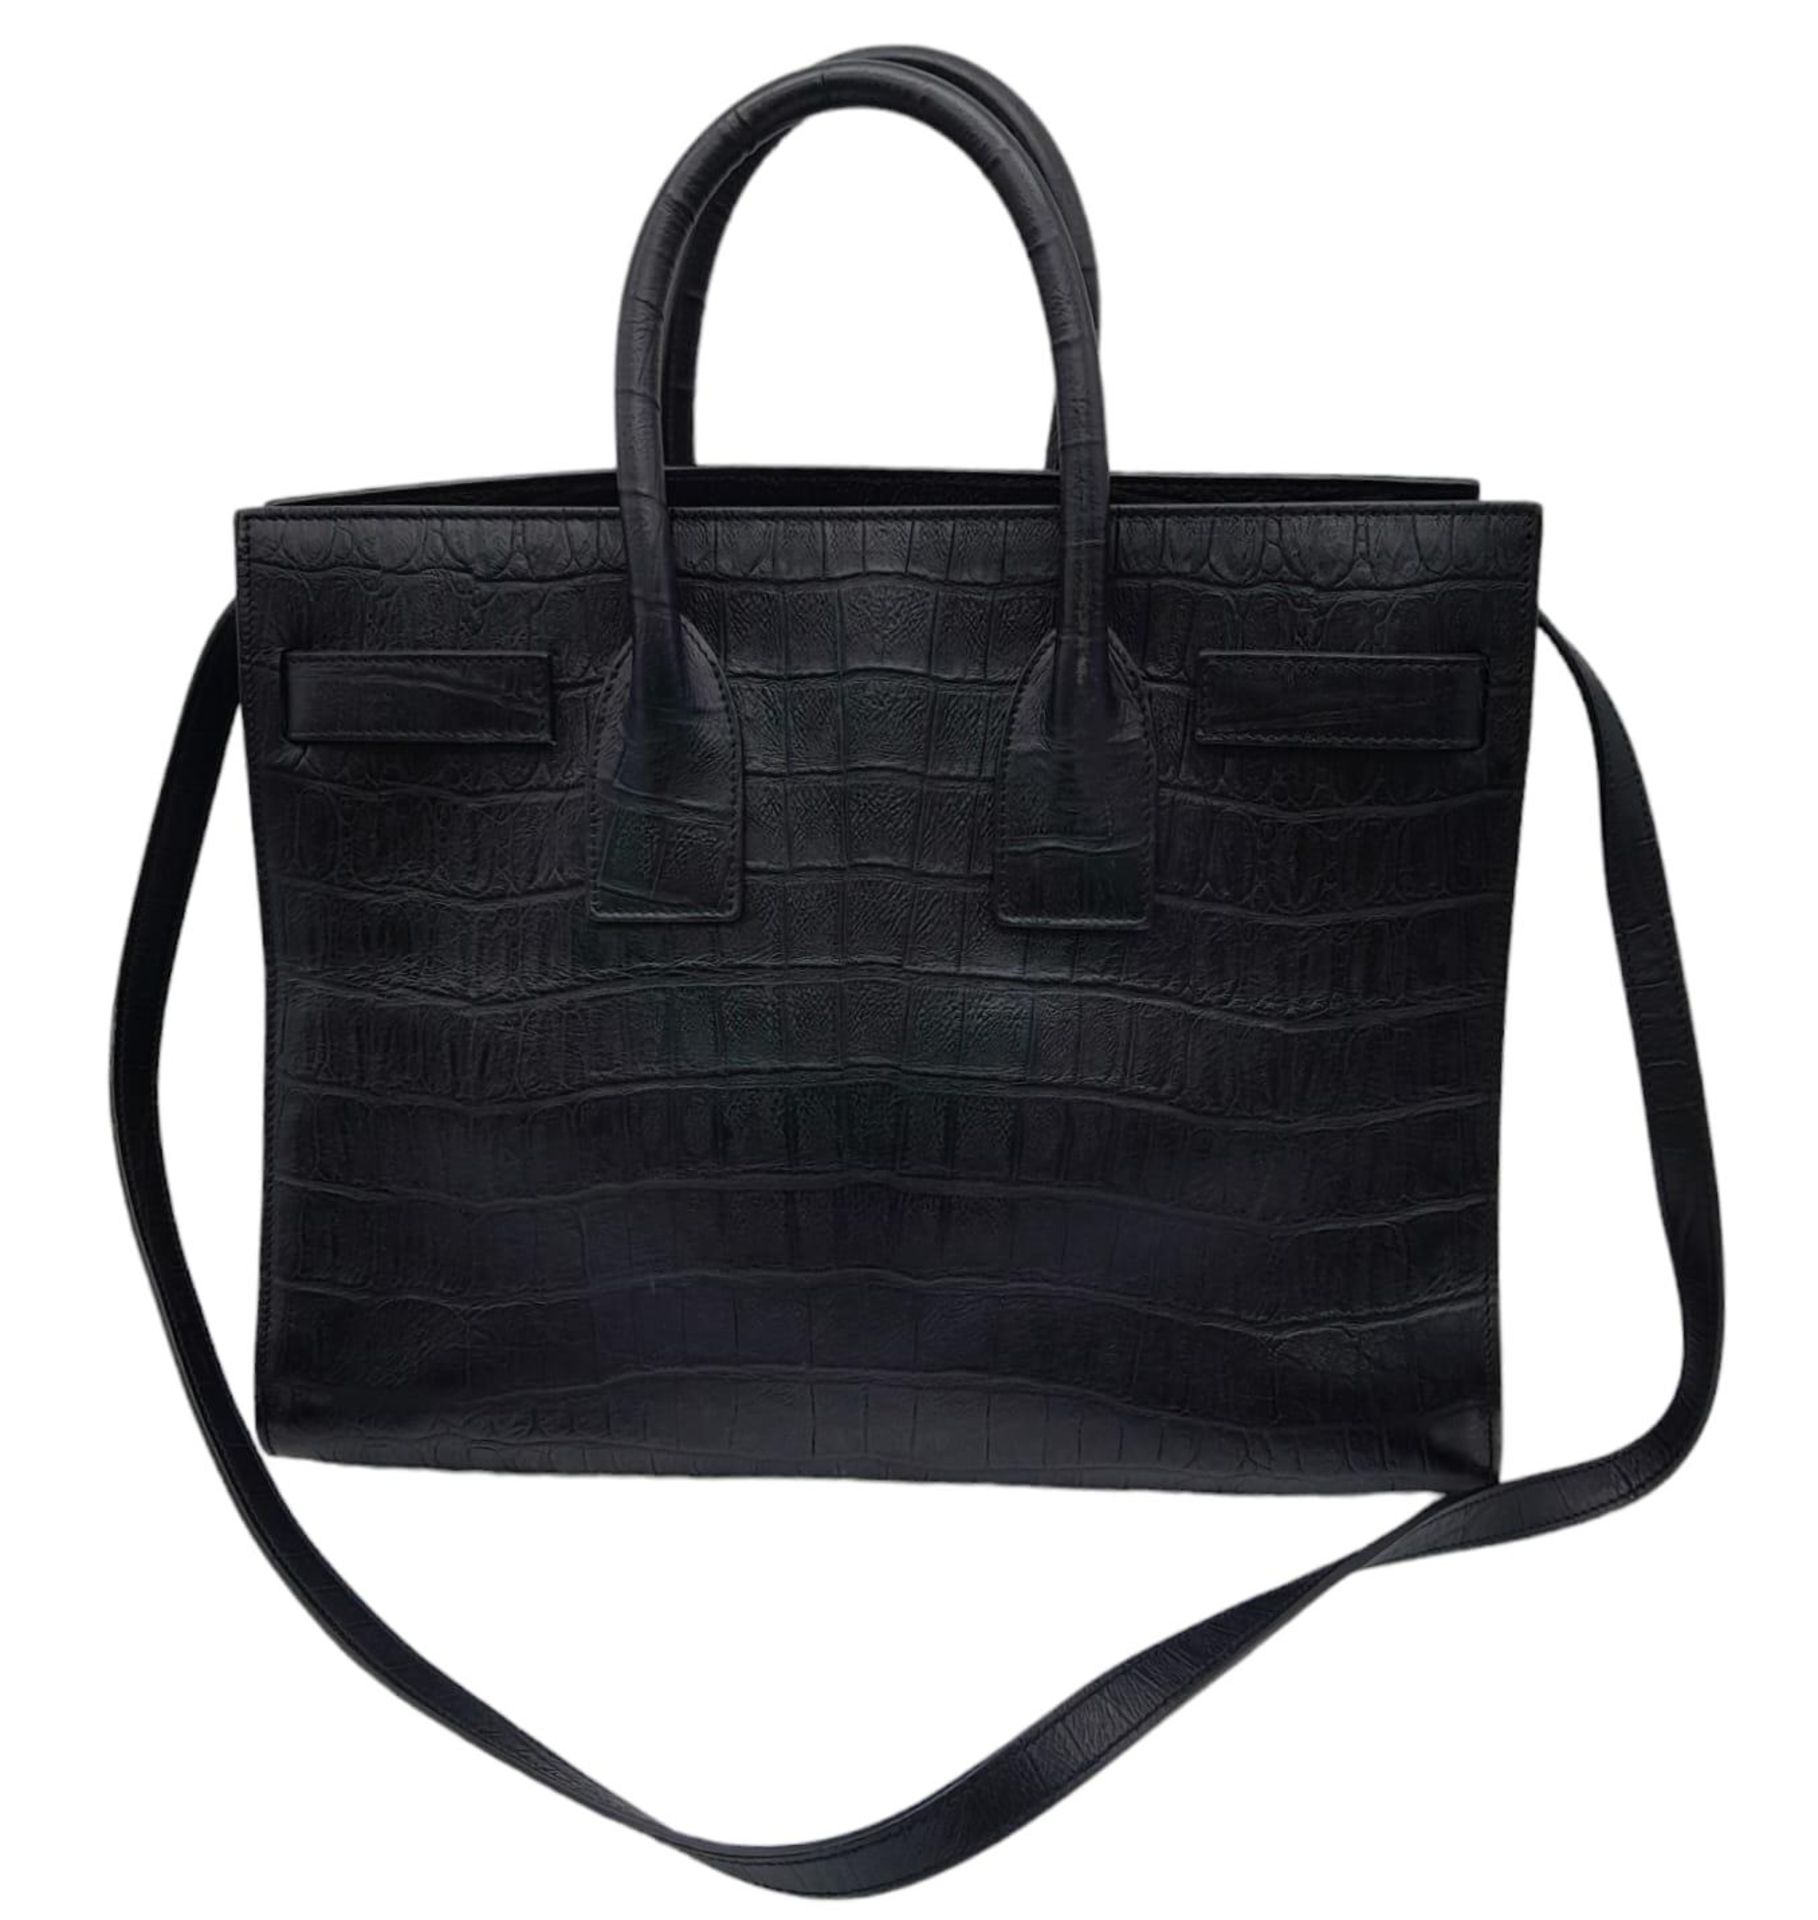 A Saint Laurent Sac de Jour Handbag. Crocodile embossed leather exterior with silver hardware and - Image 4 of 21